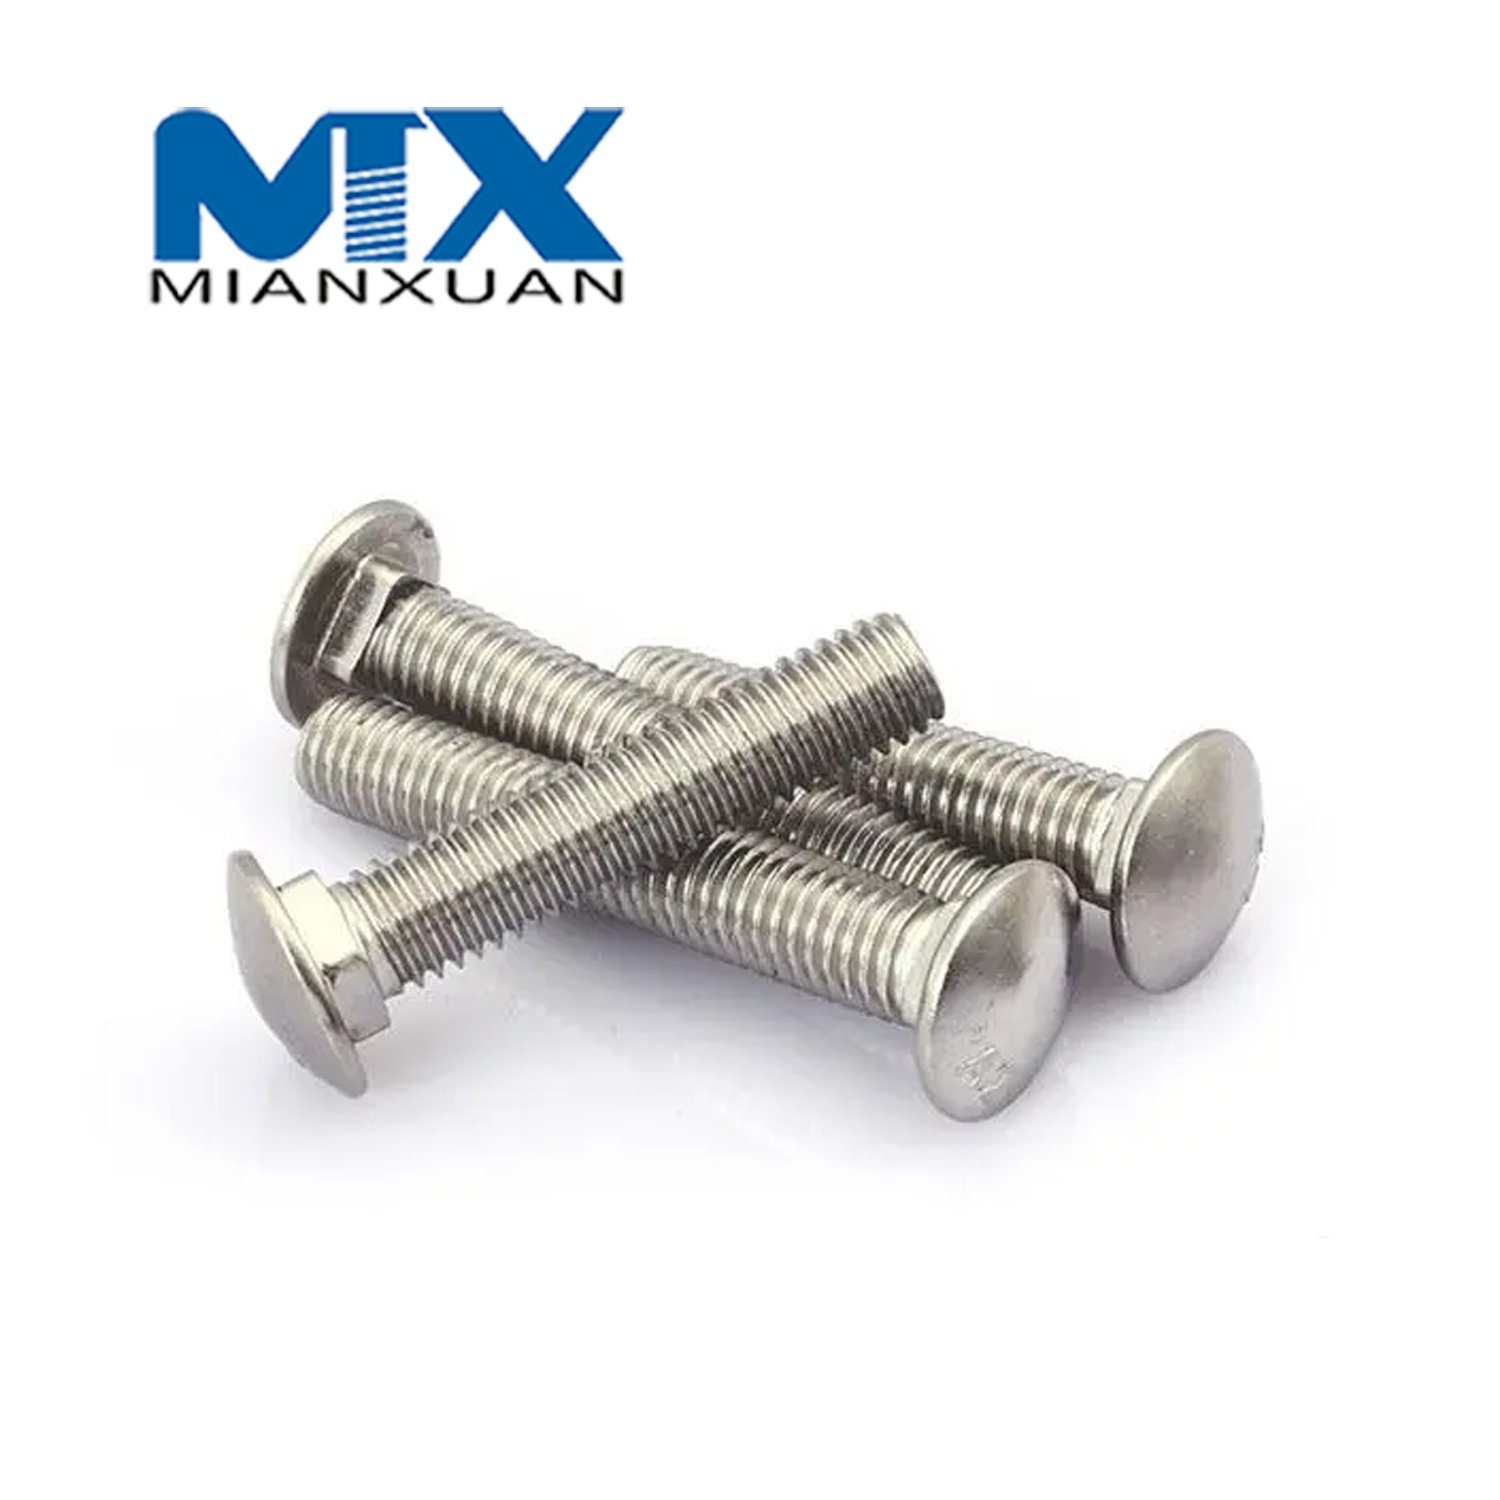 Heavy Duty GB12 Stainless Steel Carriage Bolt for Automotive Applications